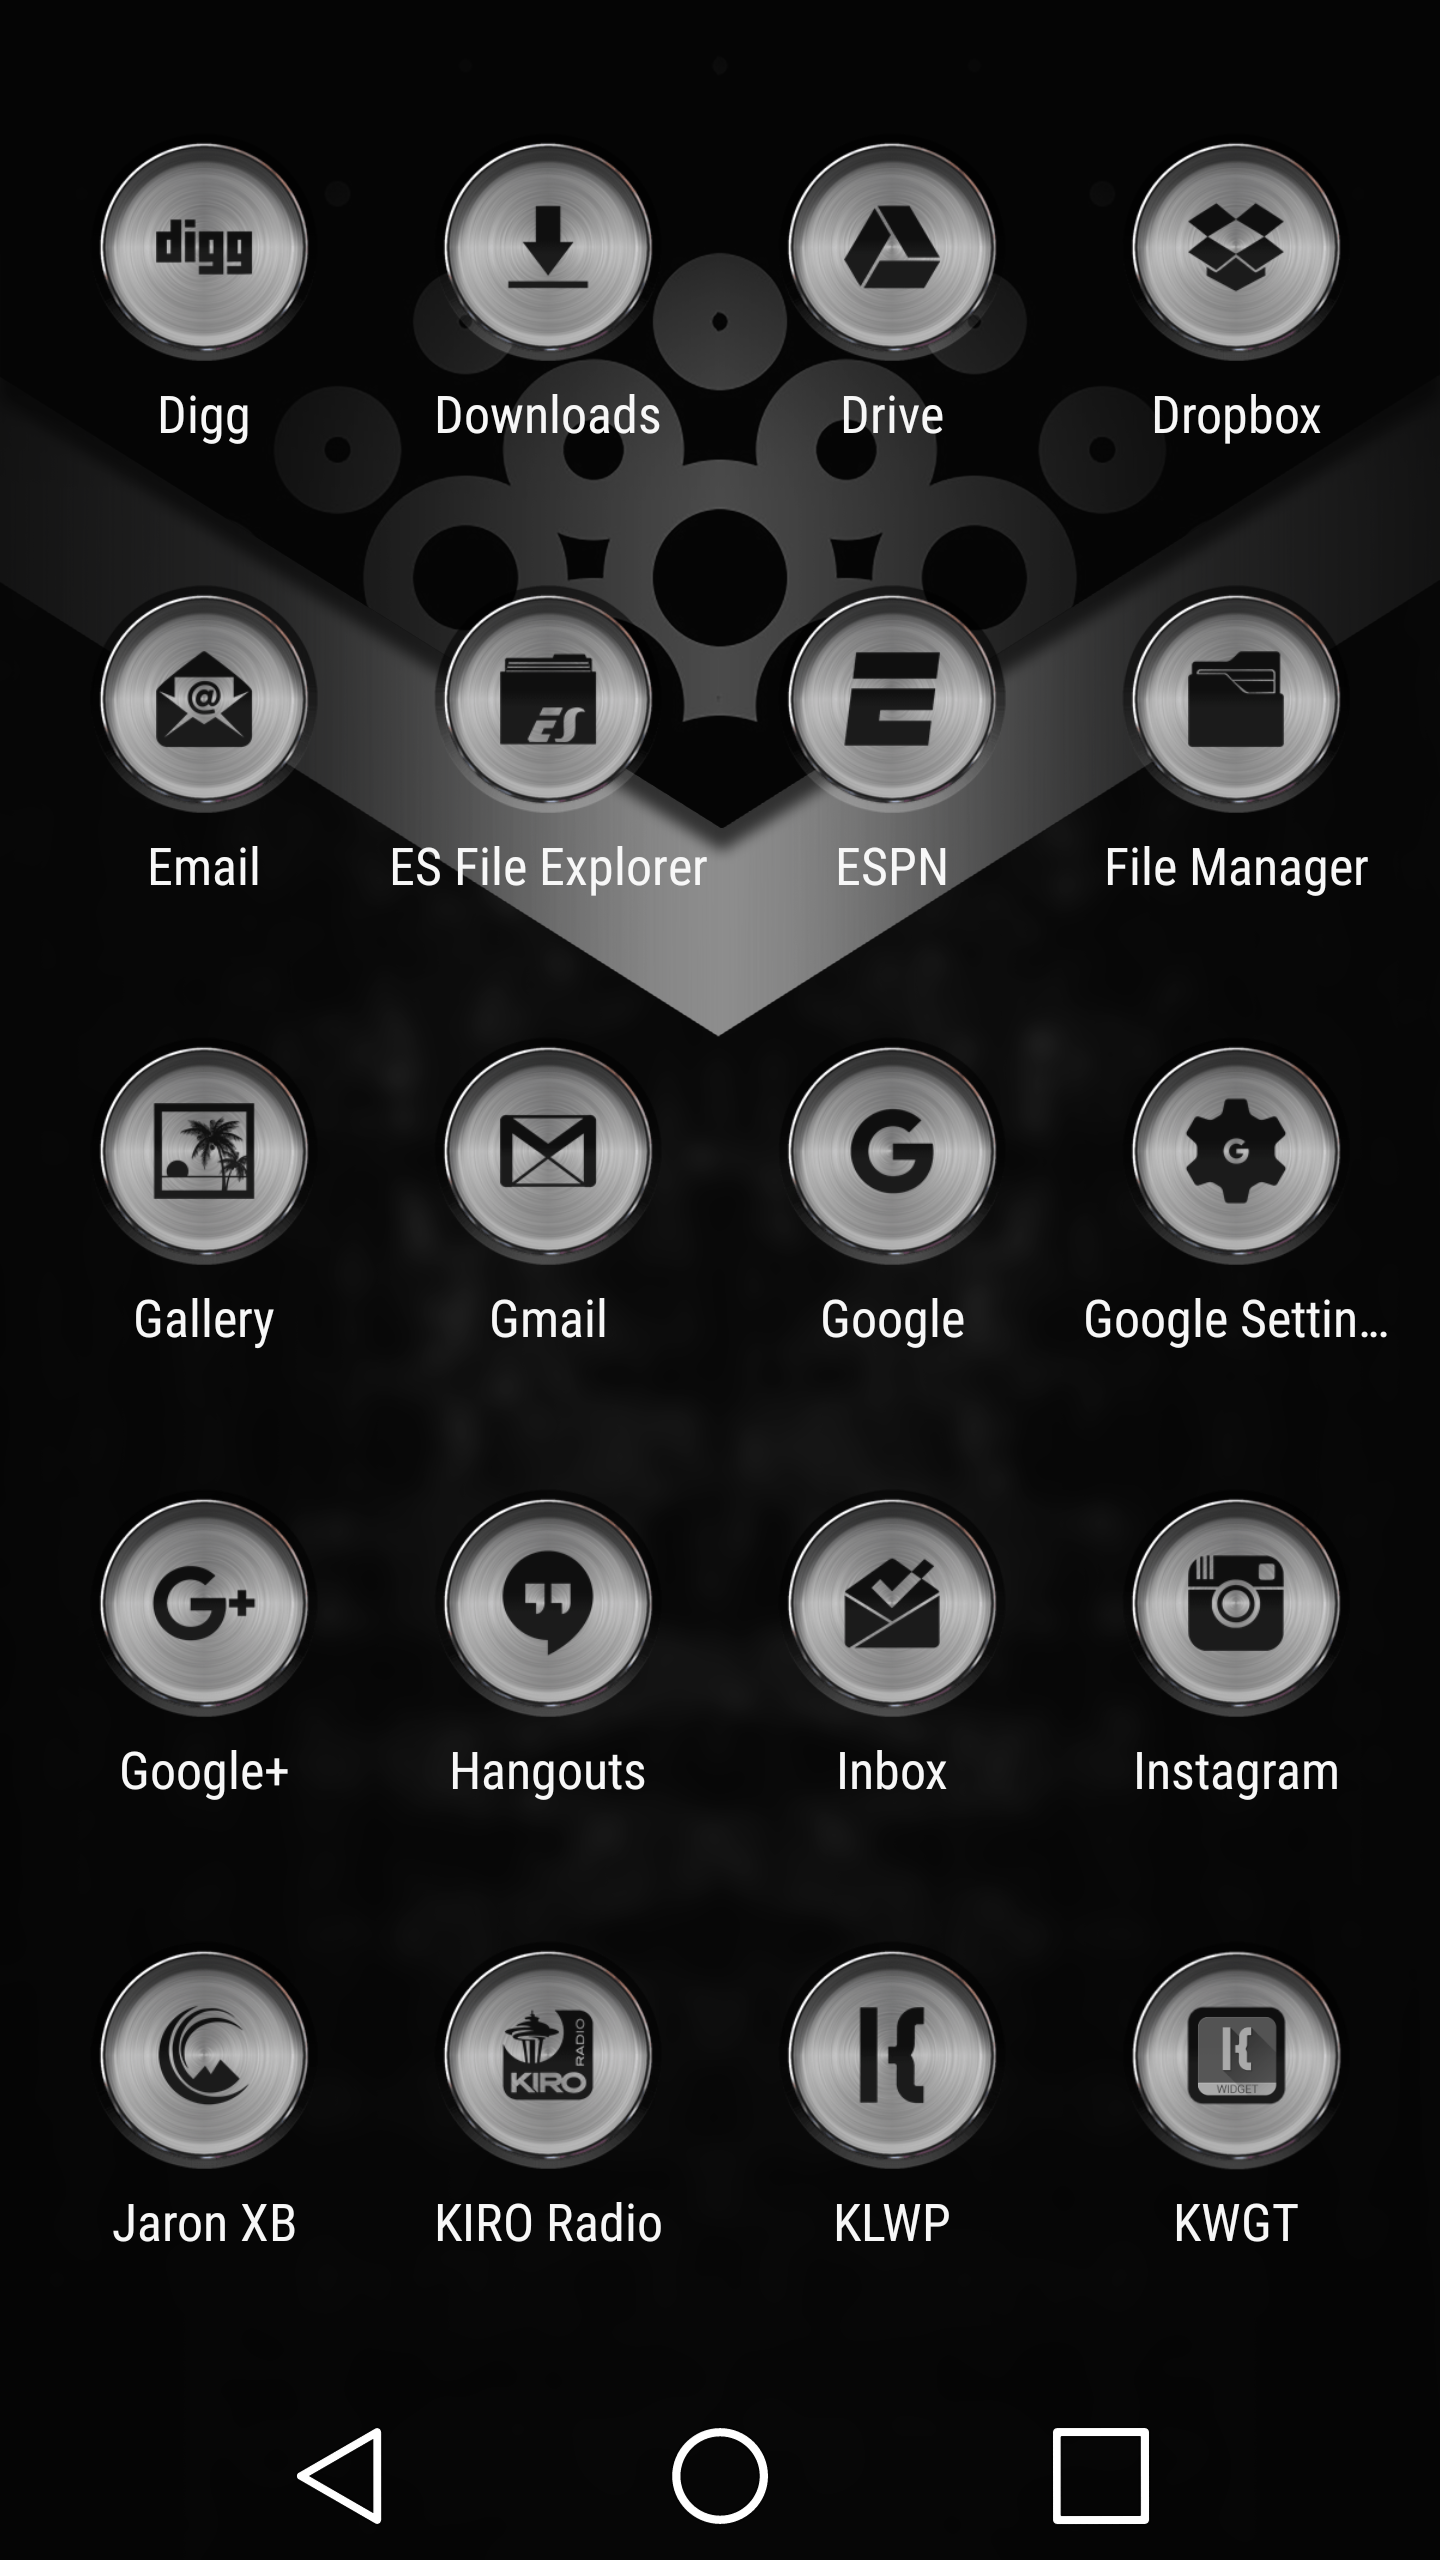 Android application Jaron XB - Icon Pack screenshort